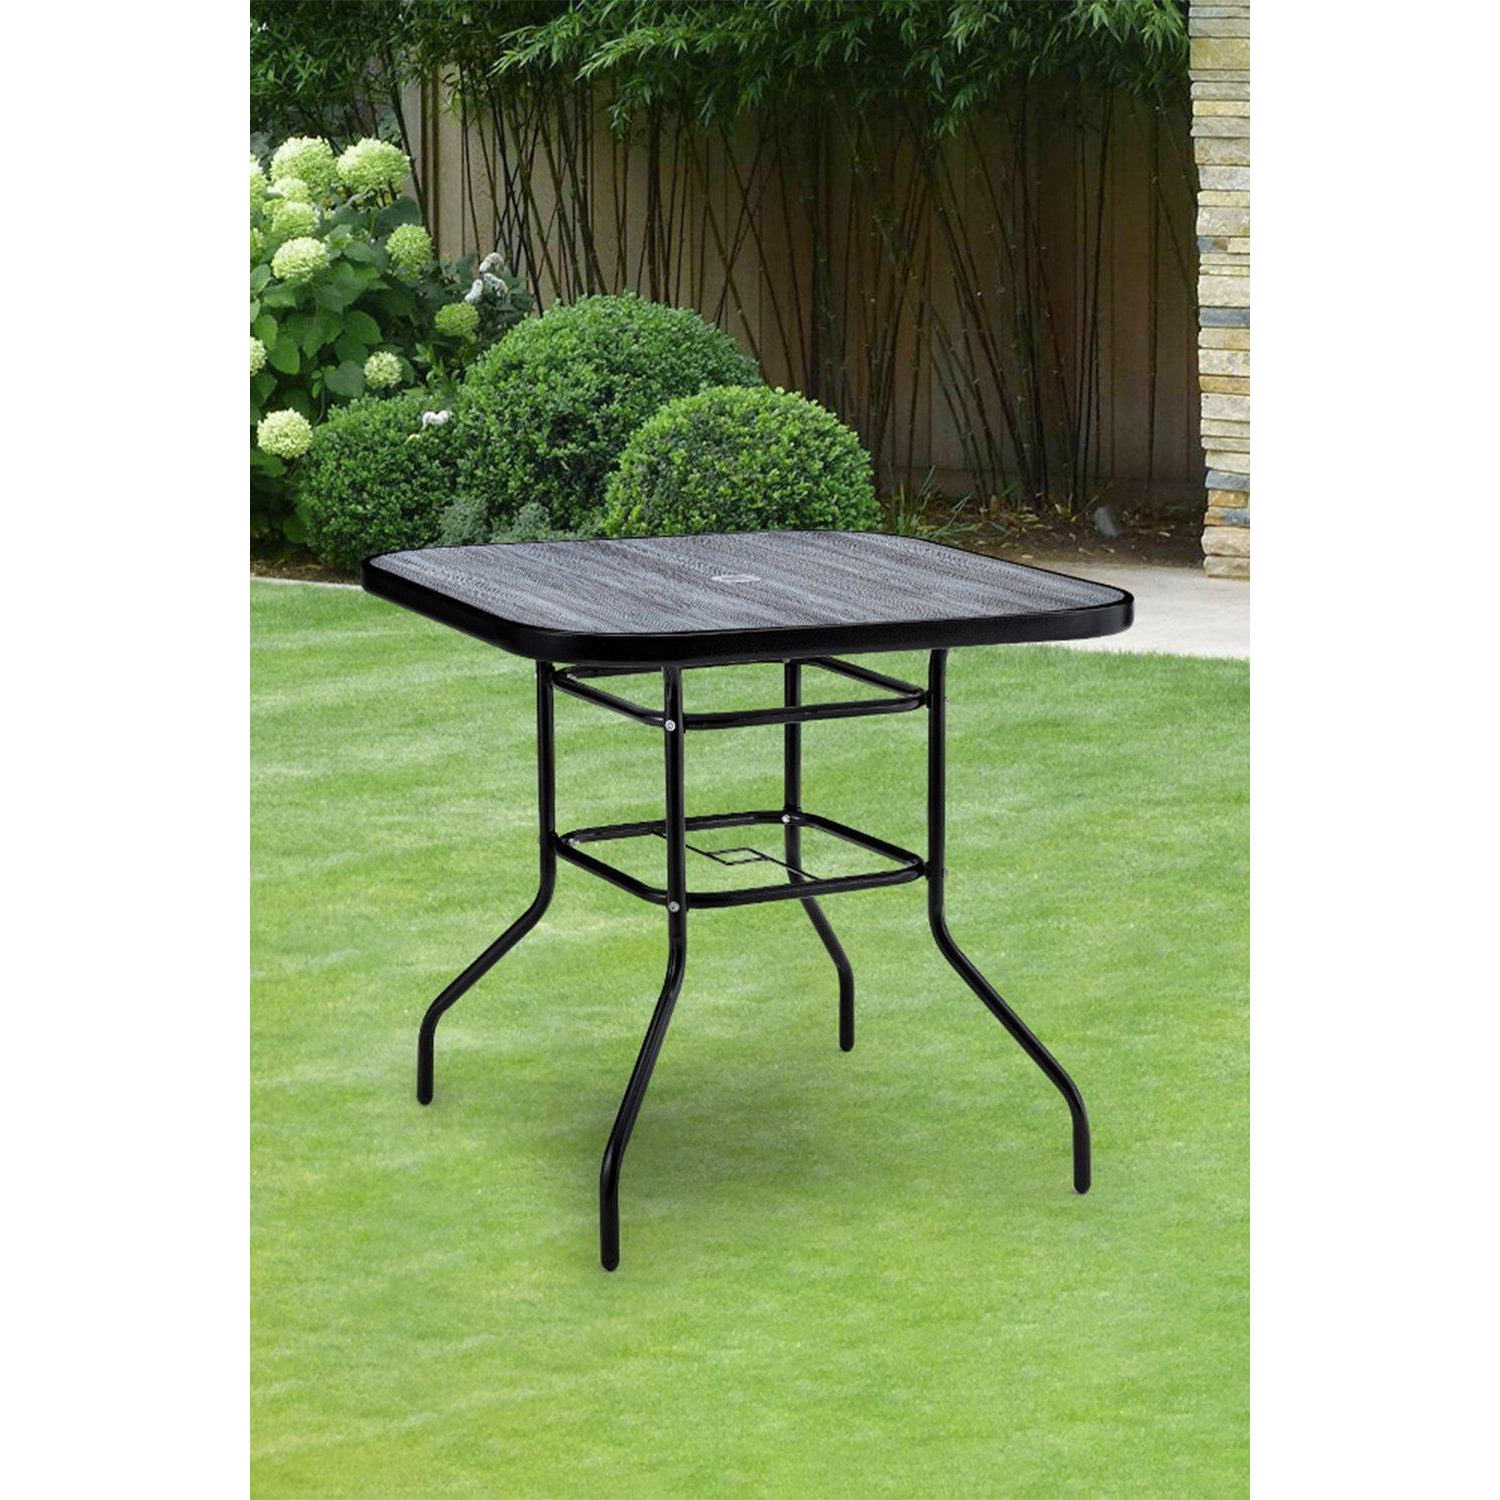 Garden Square Tempered Glass Marble Coffee Table - image 1